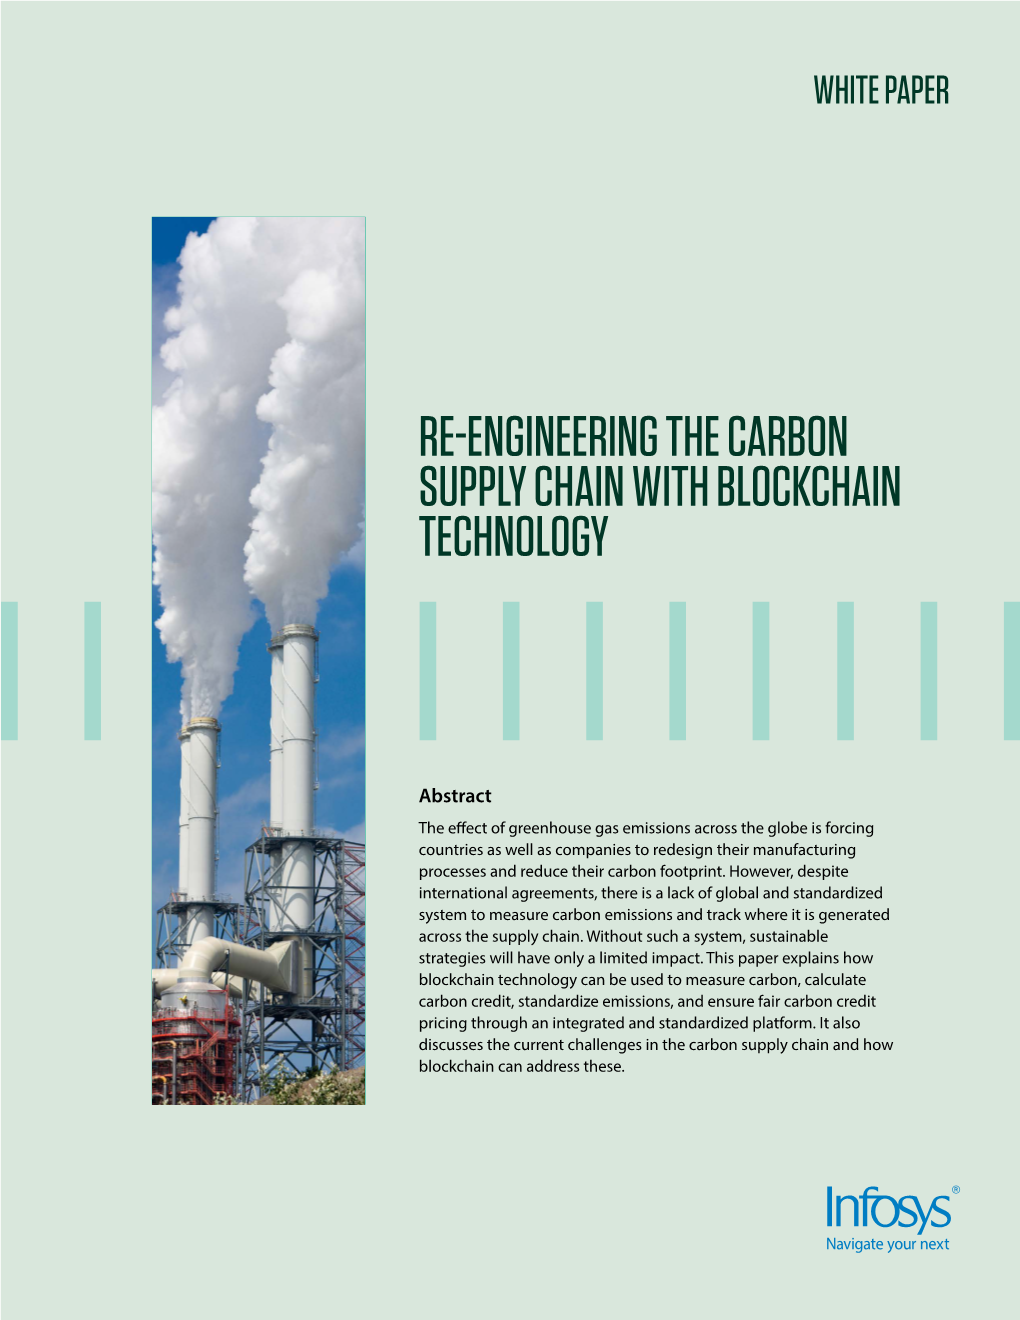 Re-Engineering the Carbon Supply Chain with Blockchain Technology